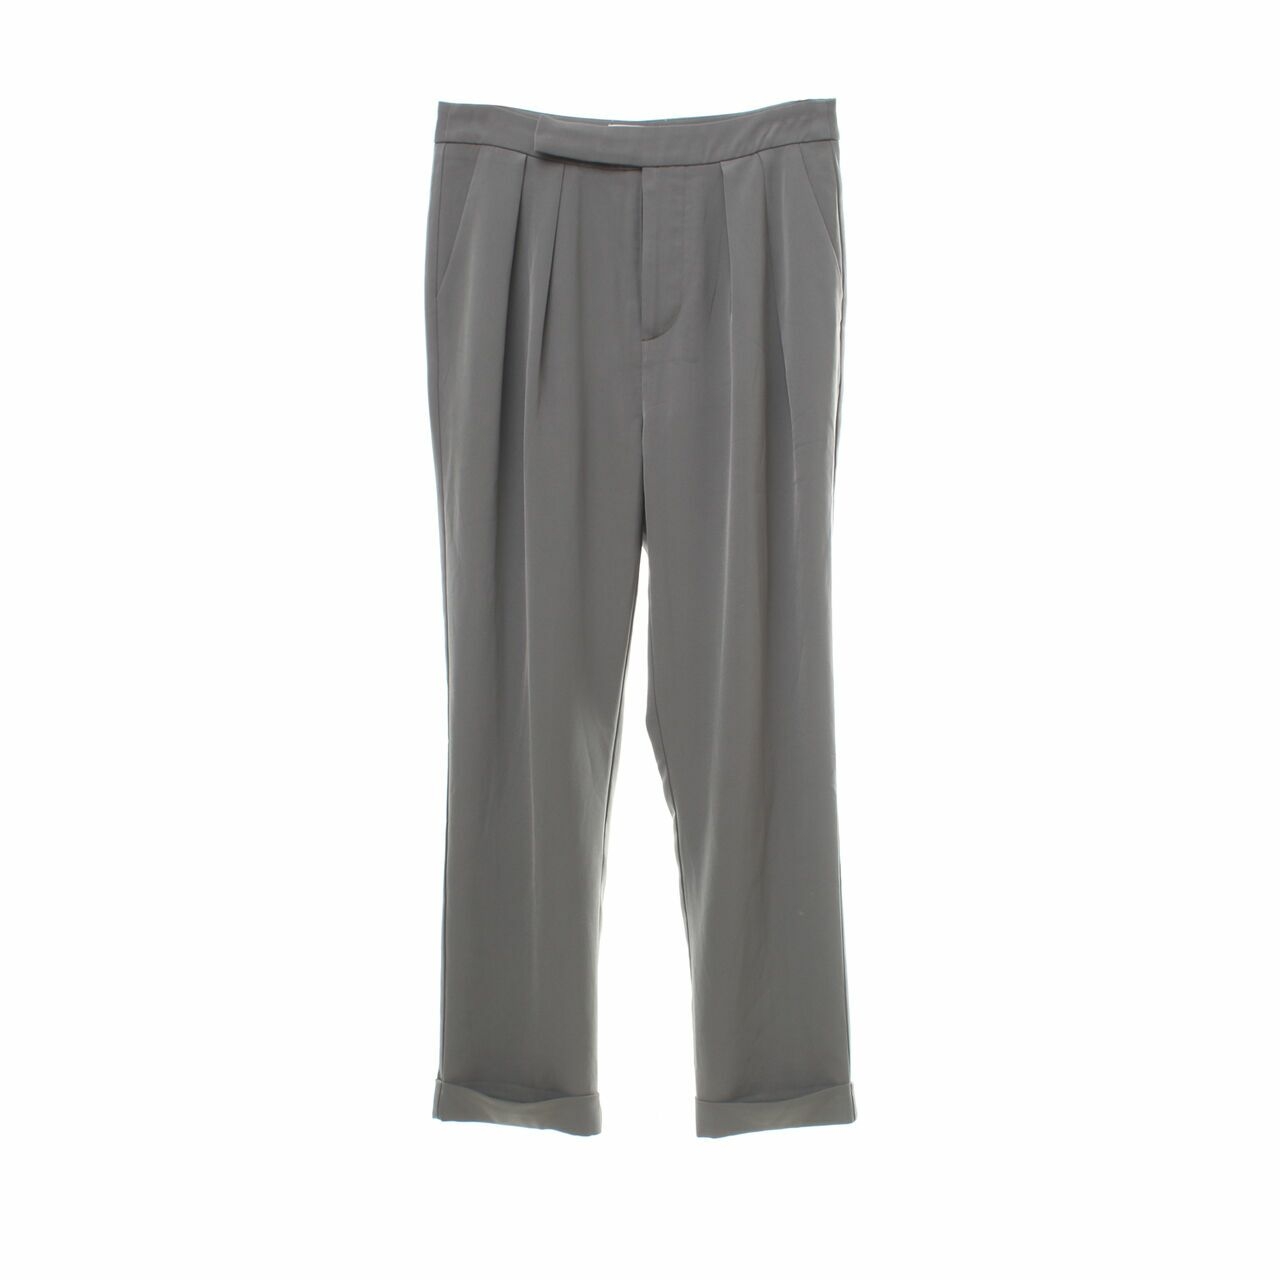 Our Second Nature Green Trousers